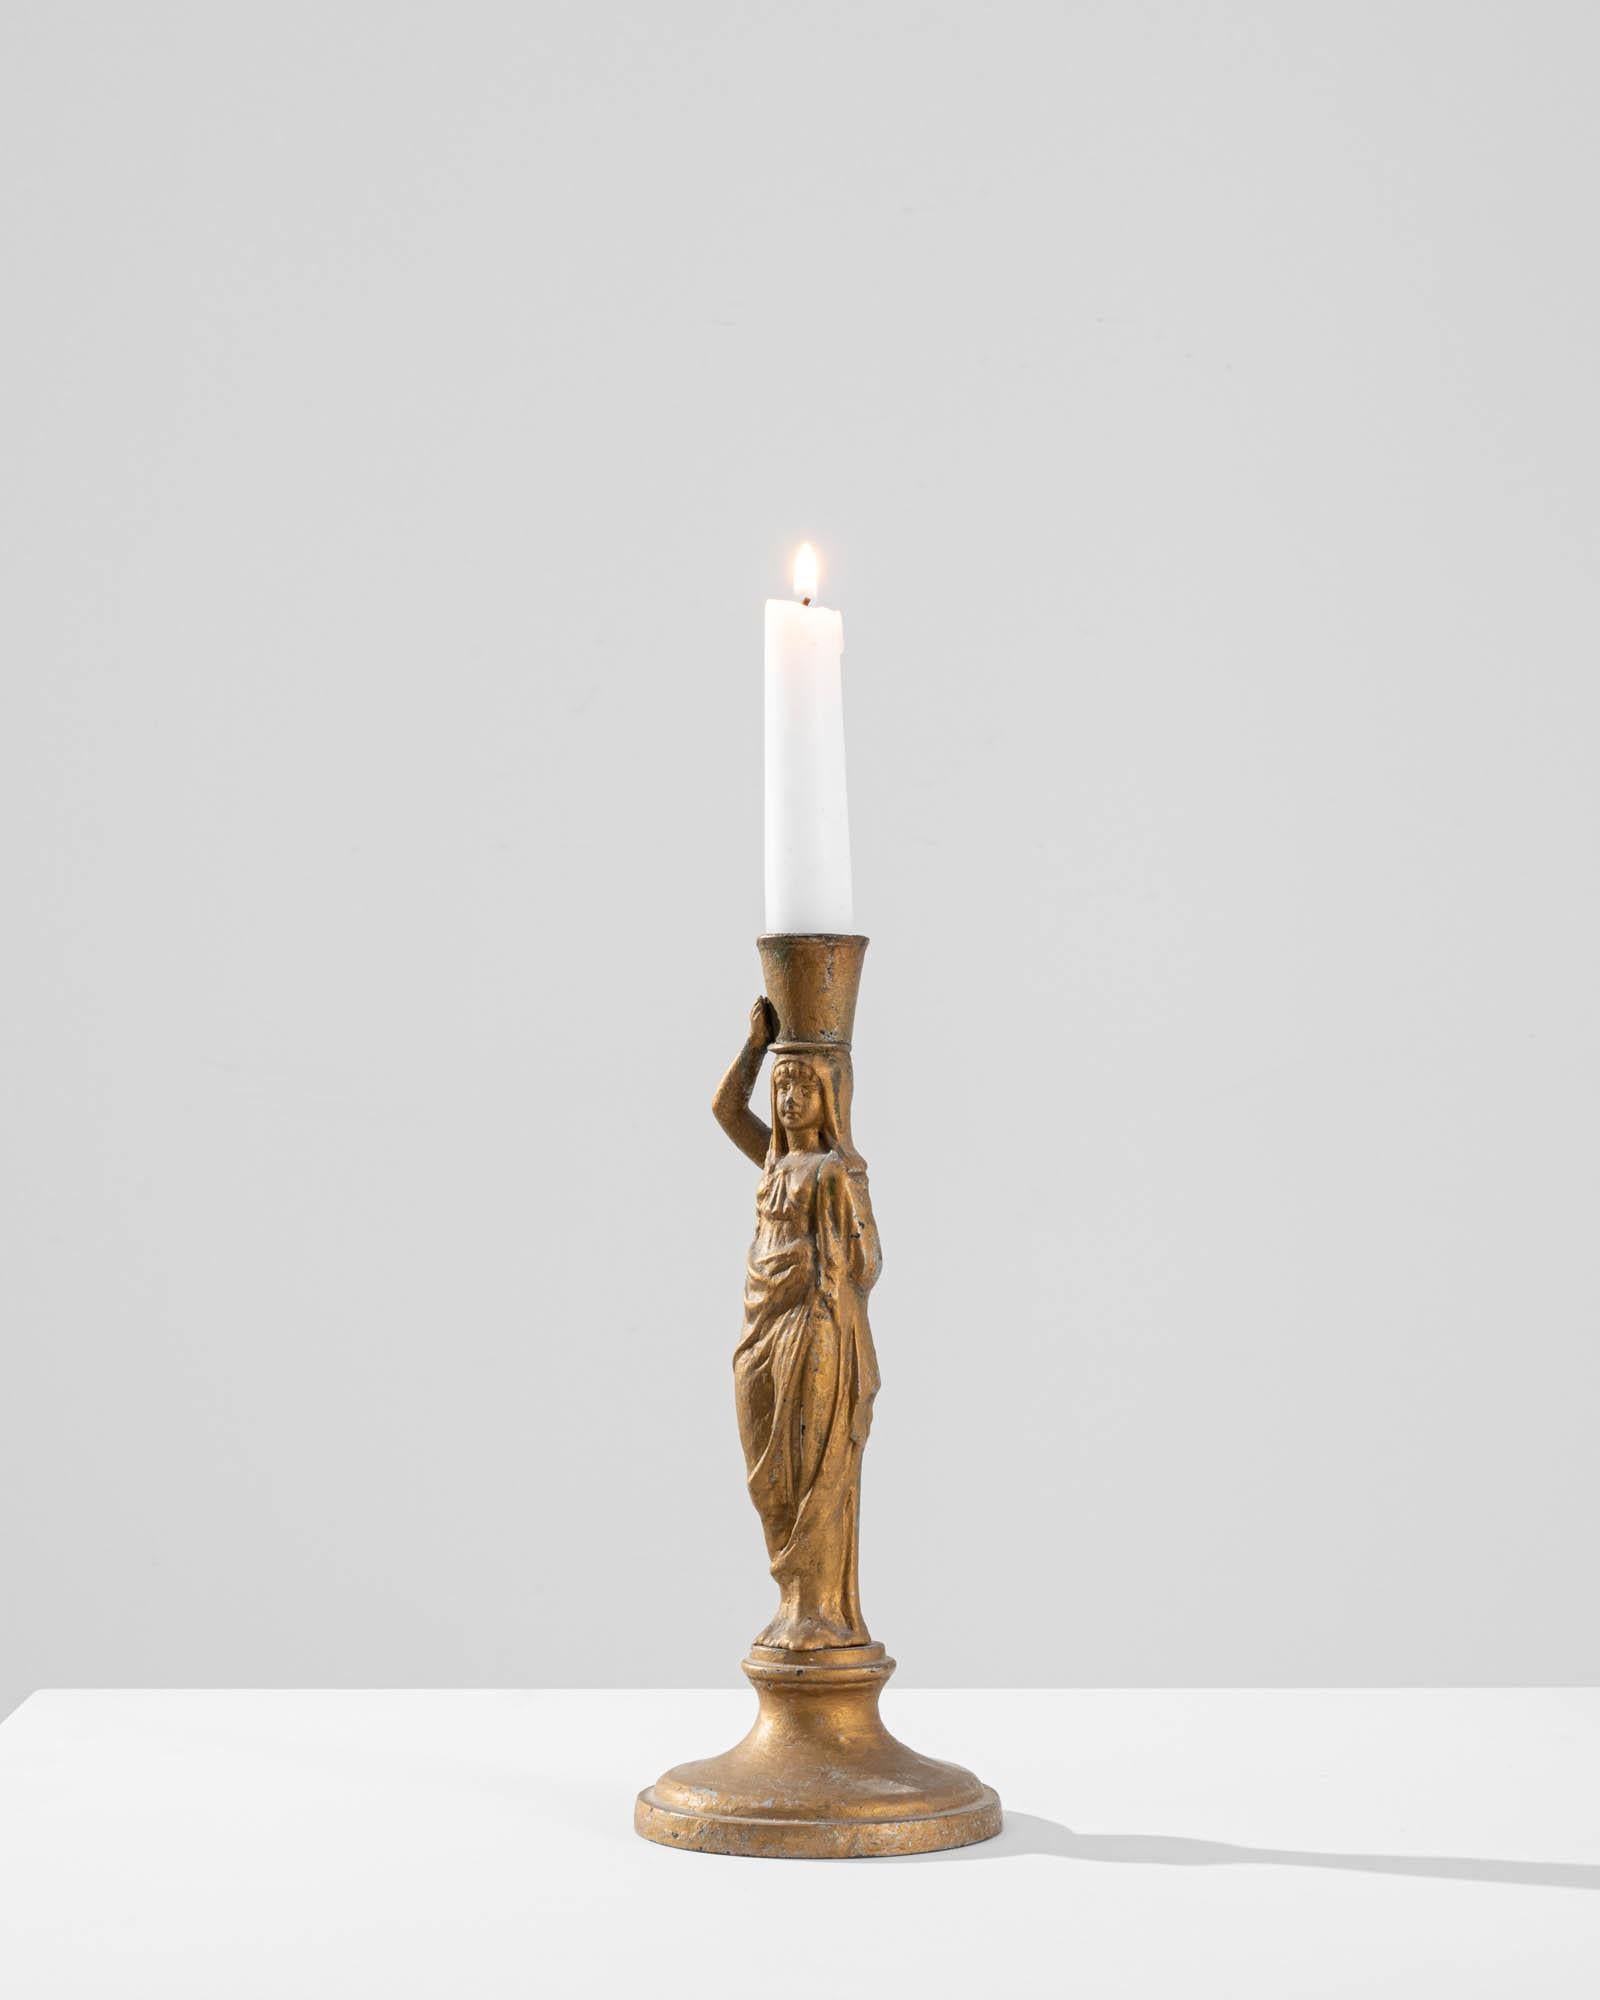 Embrace the grace and elegance of this 1900s French Brass Woman Candlestick. Crafted from brass, this candlestick features a stunning depiction of a woman standing on a pedestal with remarkable poise. She carries a water bucket atop her head,